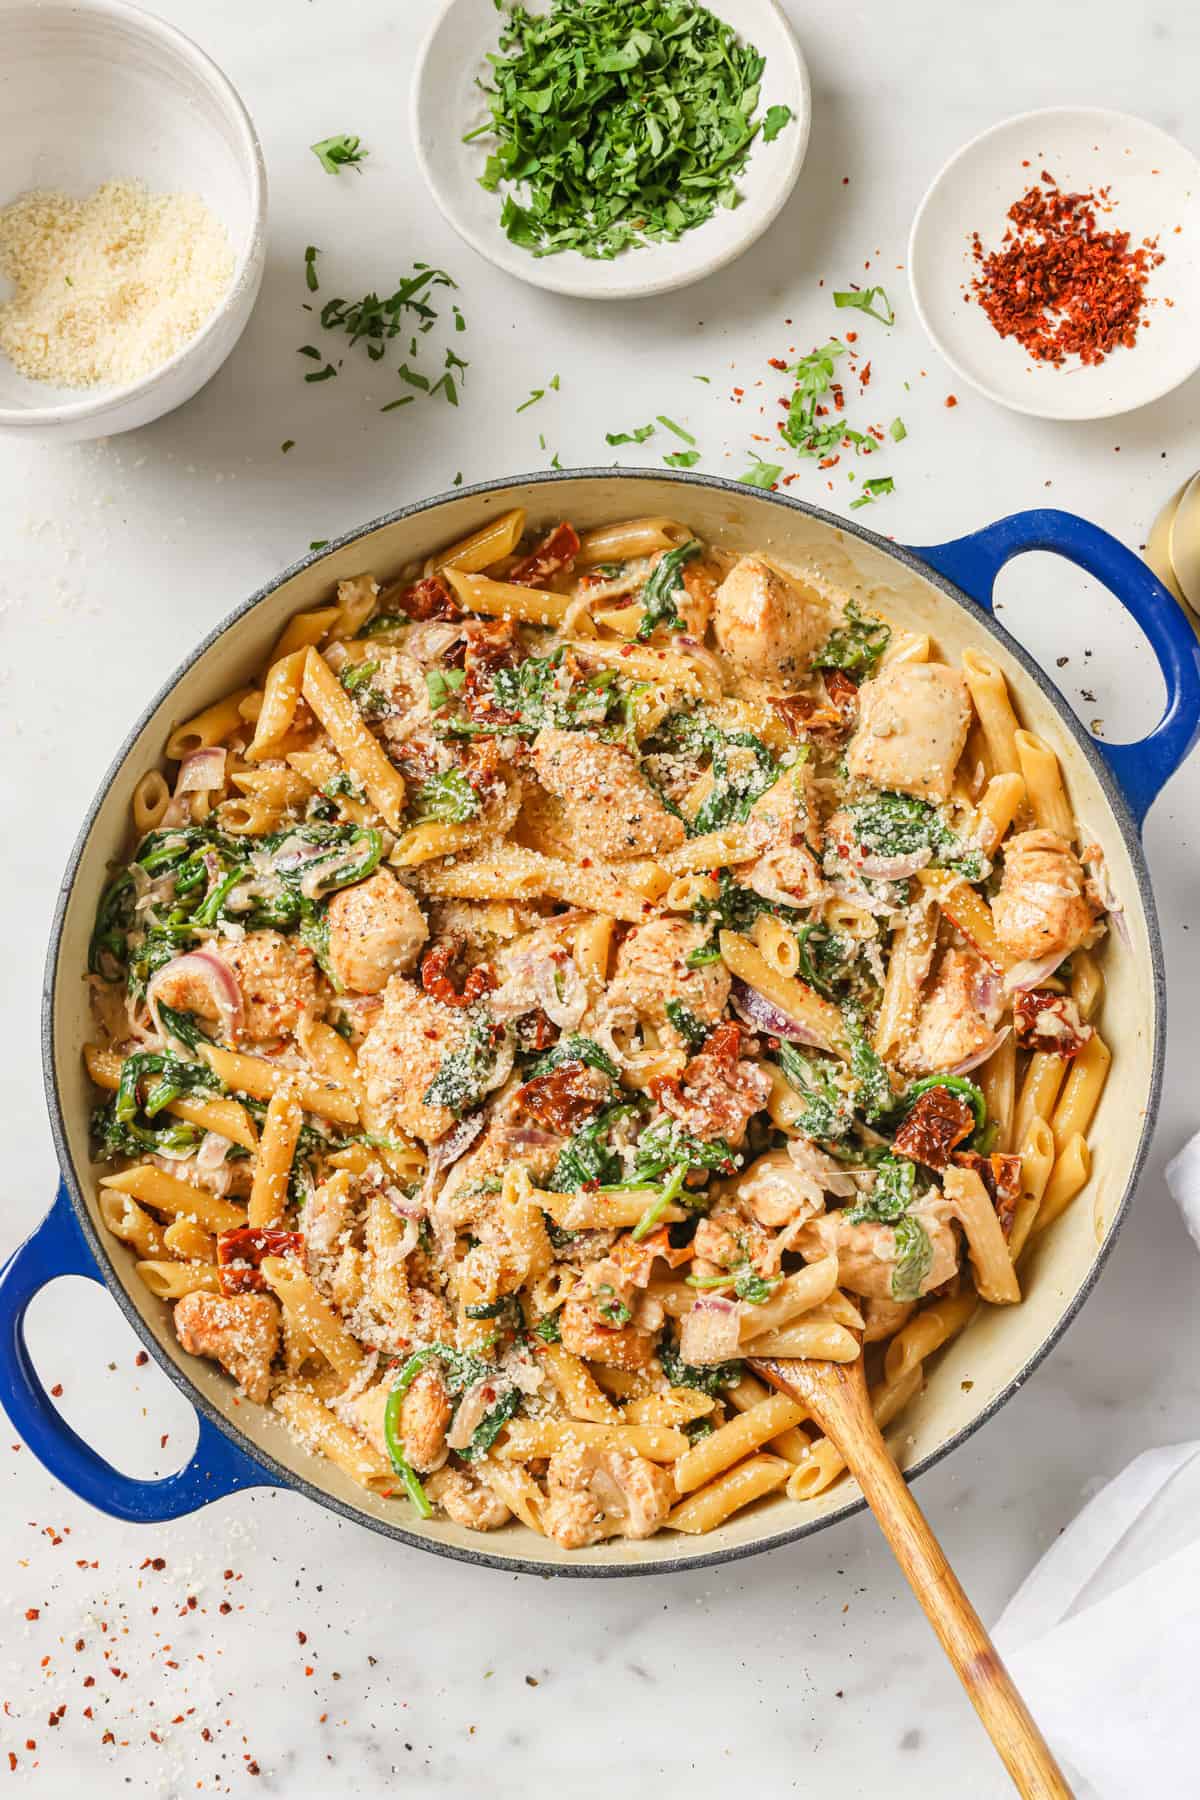 An enameled cast iron skillet filled with a pasta dish made with chicken, penne, sun-dried tomatoes, spinach, red onion and a rich creamy sauce